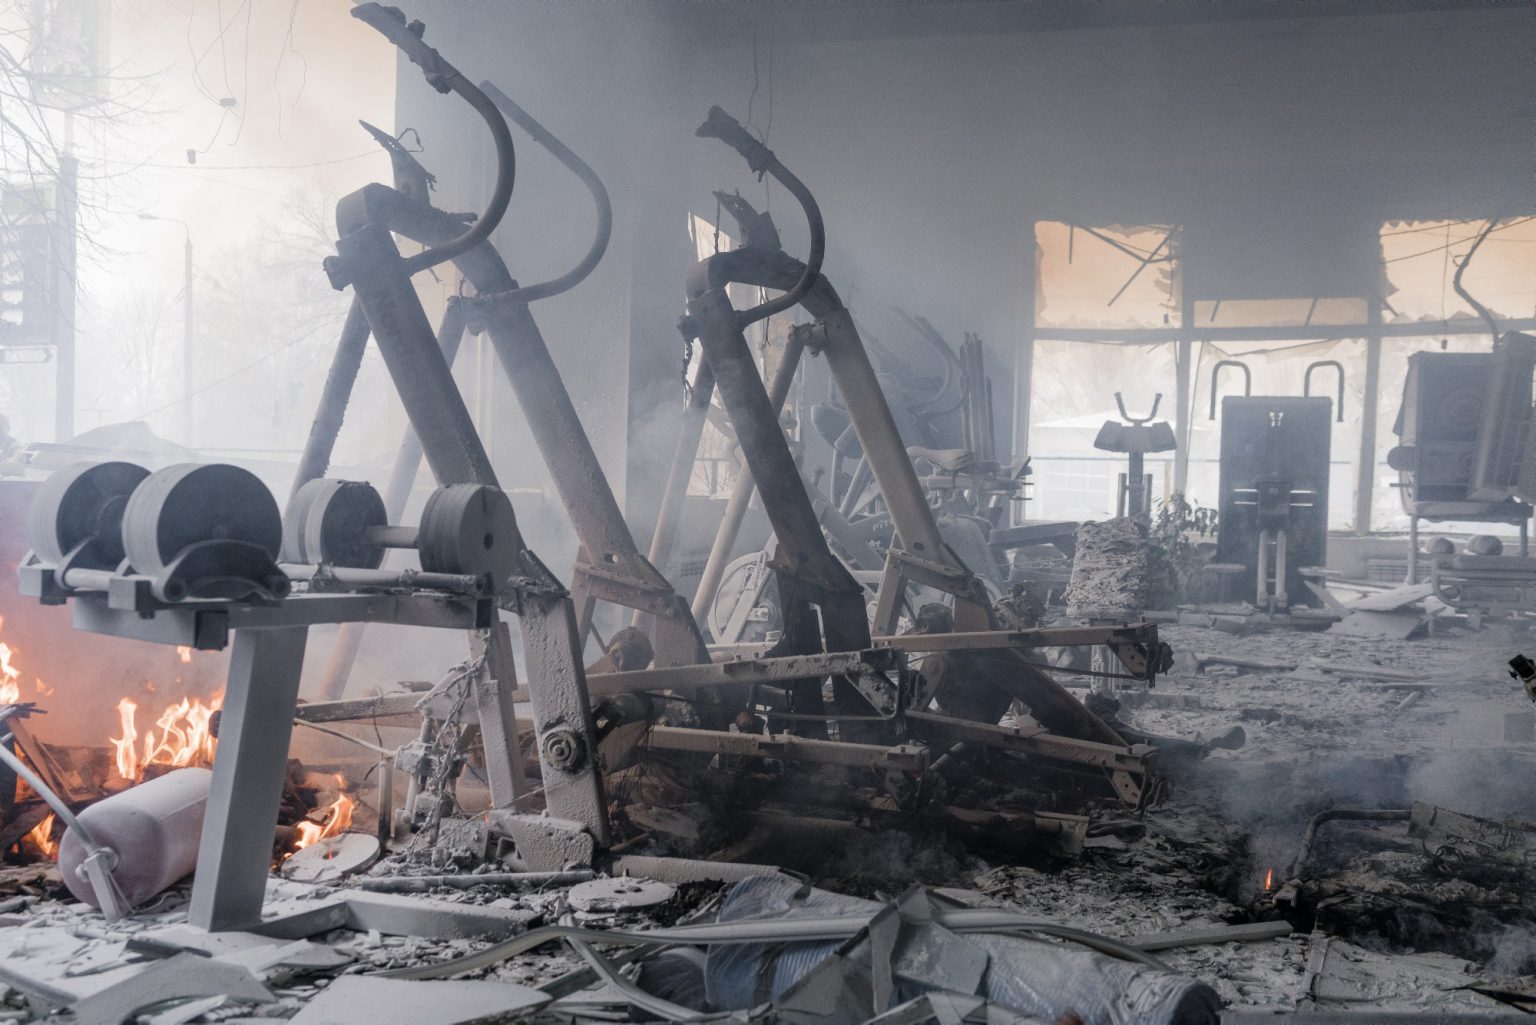 UKRAINE, Kyiv. March 02, 2022 - The interior of a gym damaged by a missile strike on the main television tower in Kyiv.